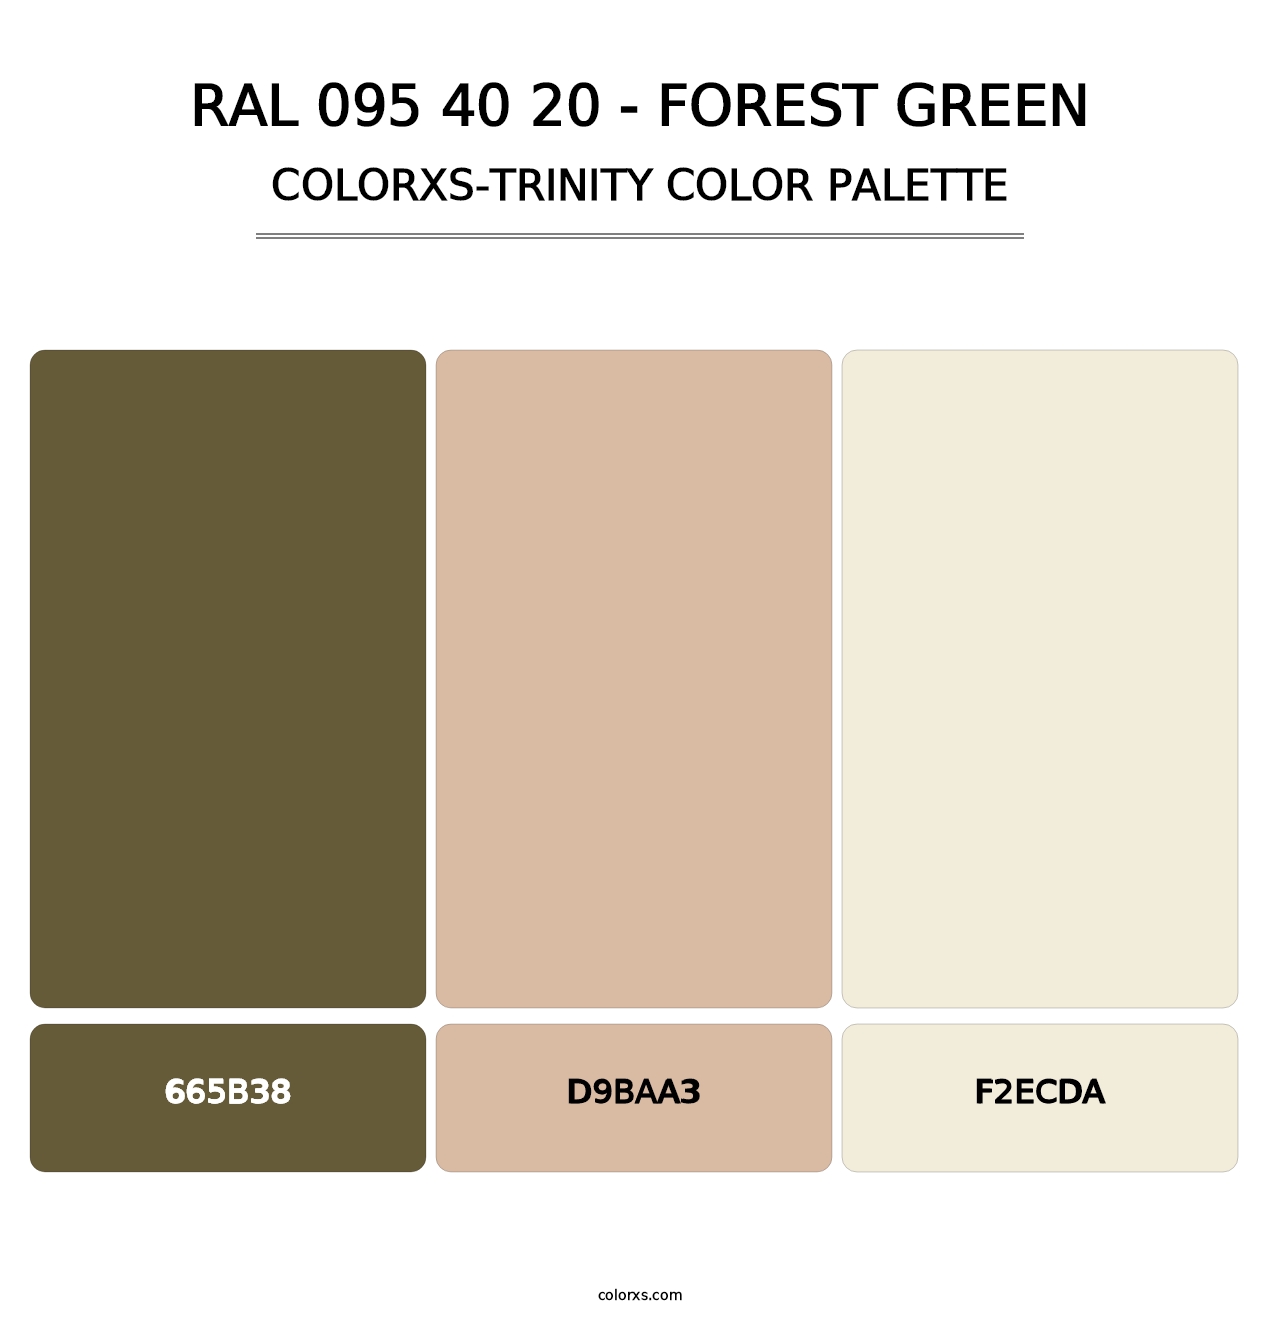 RAL 095 40 20 - Forest Green - Colorxs Trinity Palette